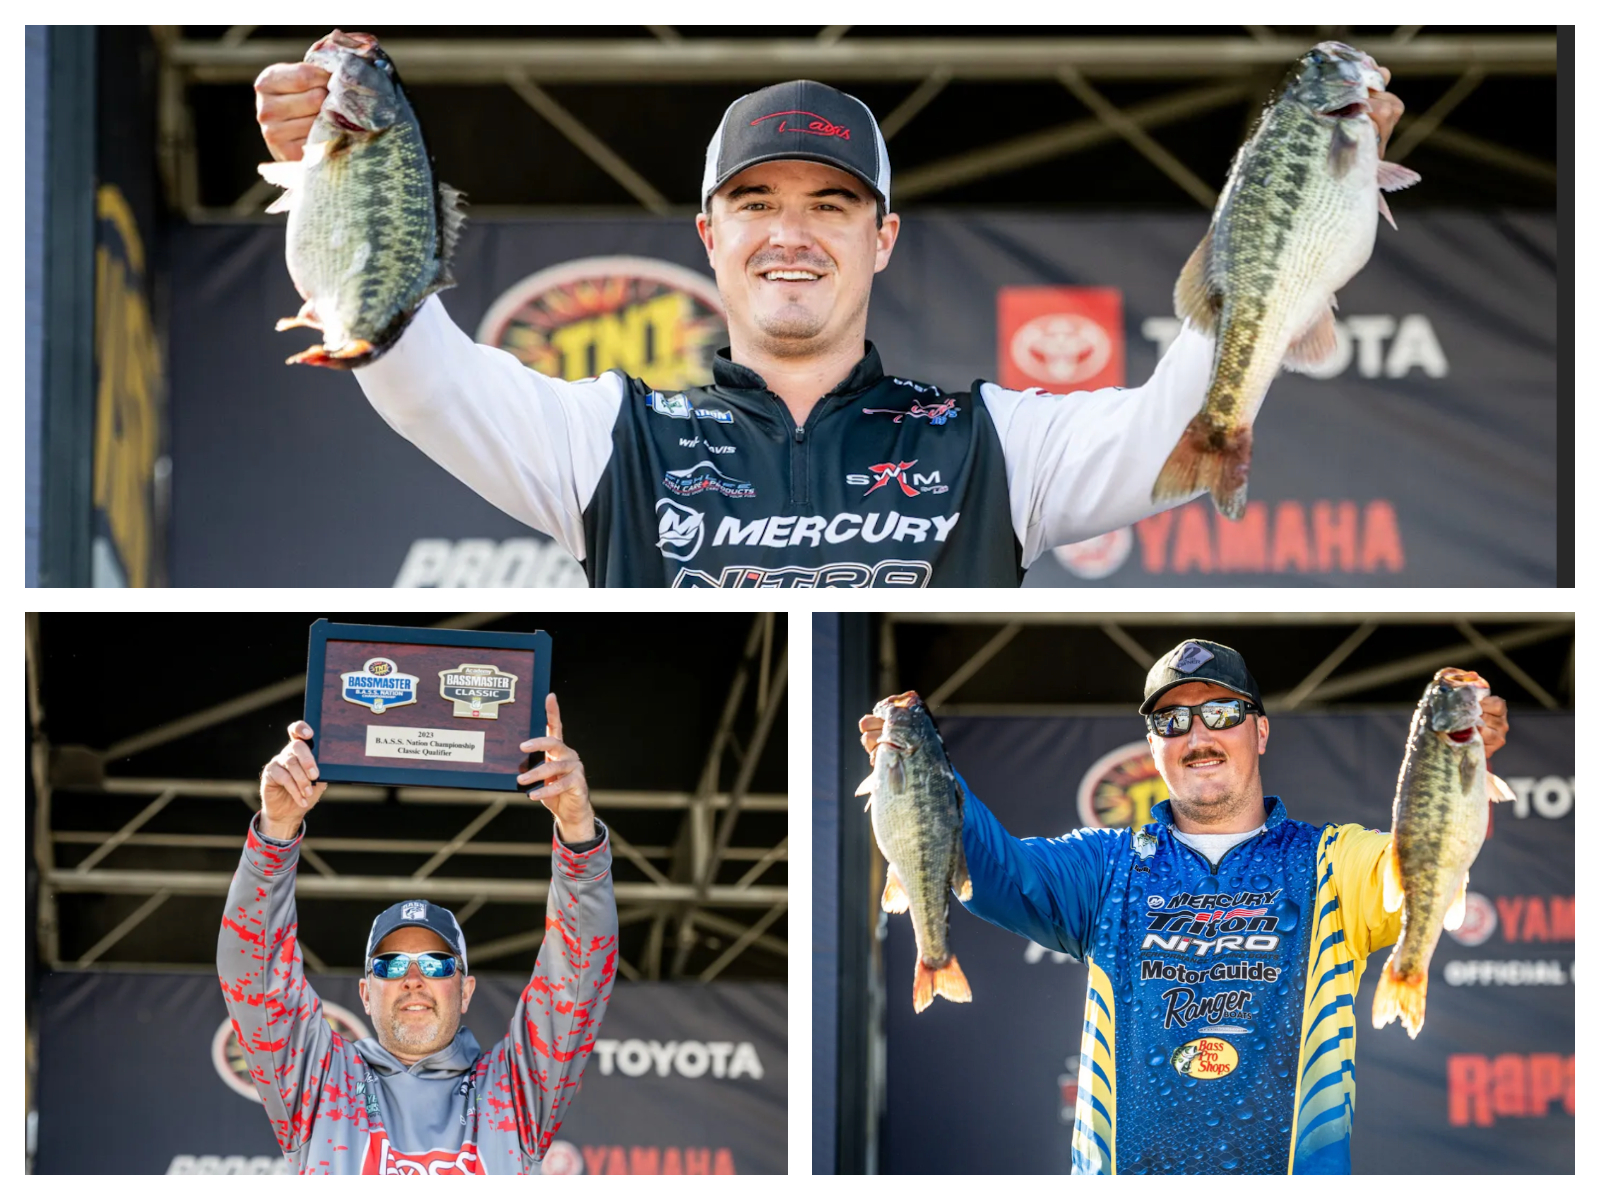 Meet the B.A.S.S. Nation's Classic qualifiers - Bassmaster